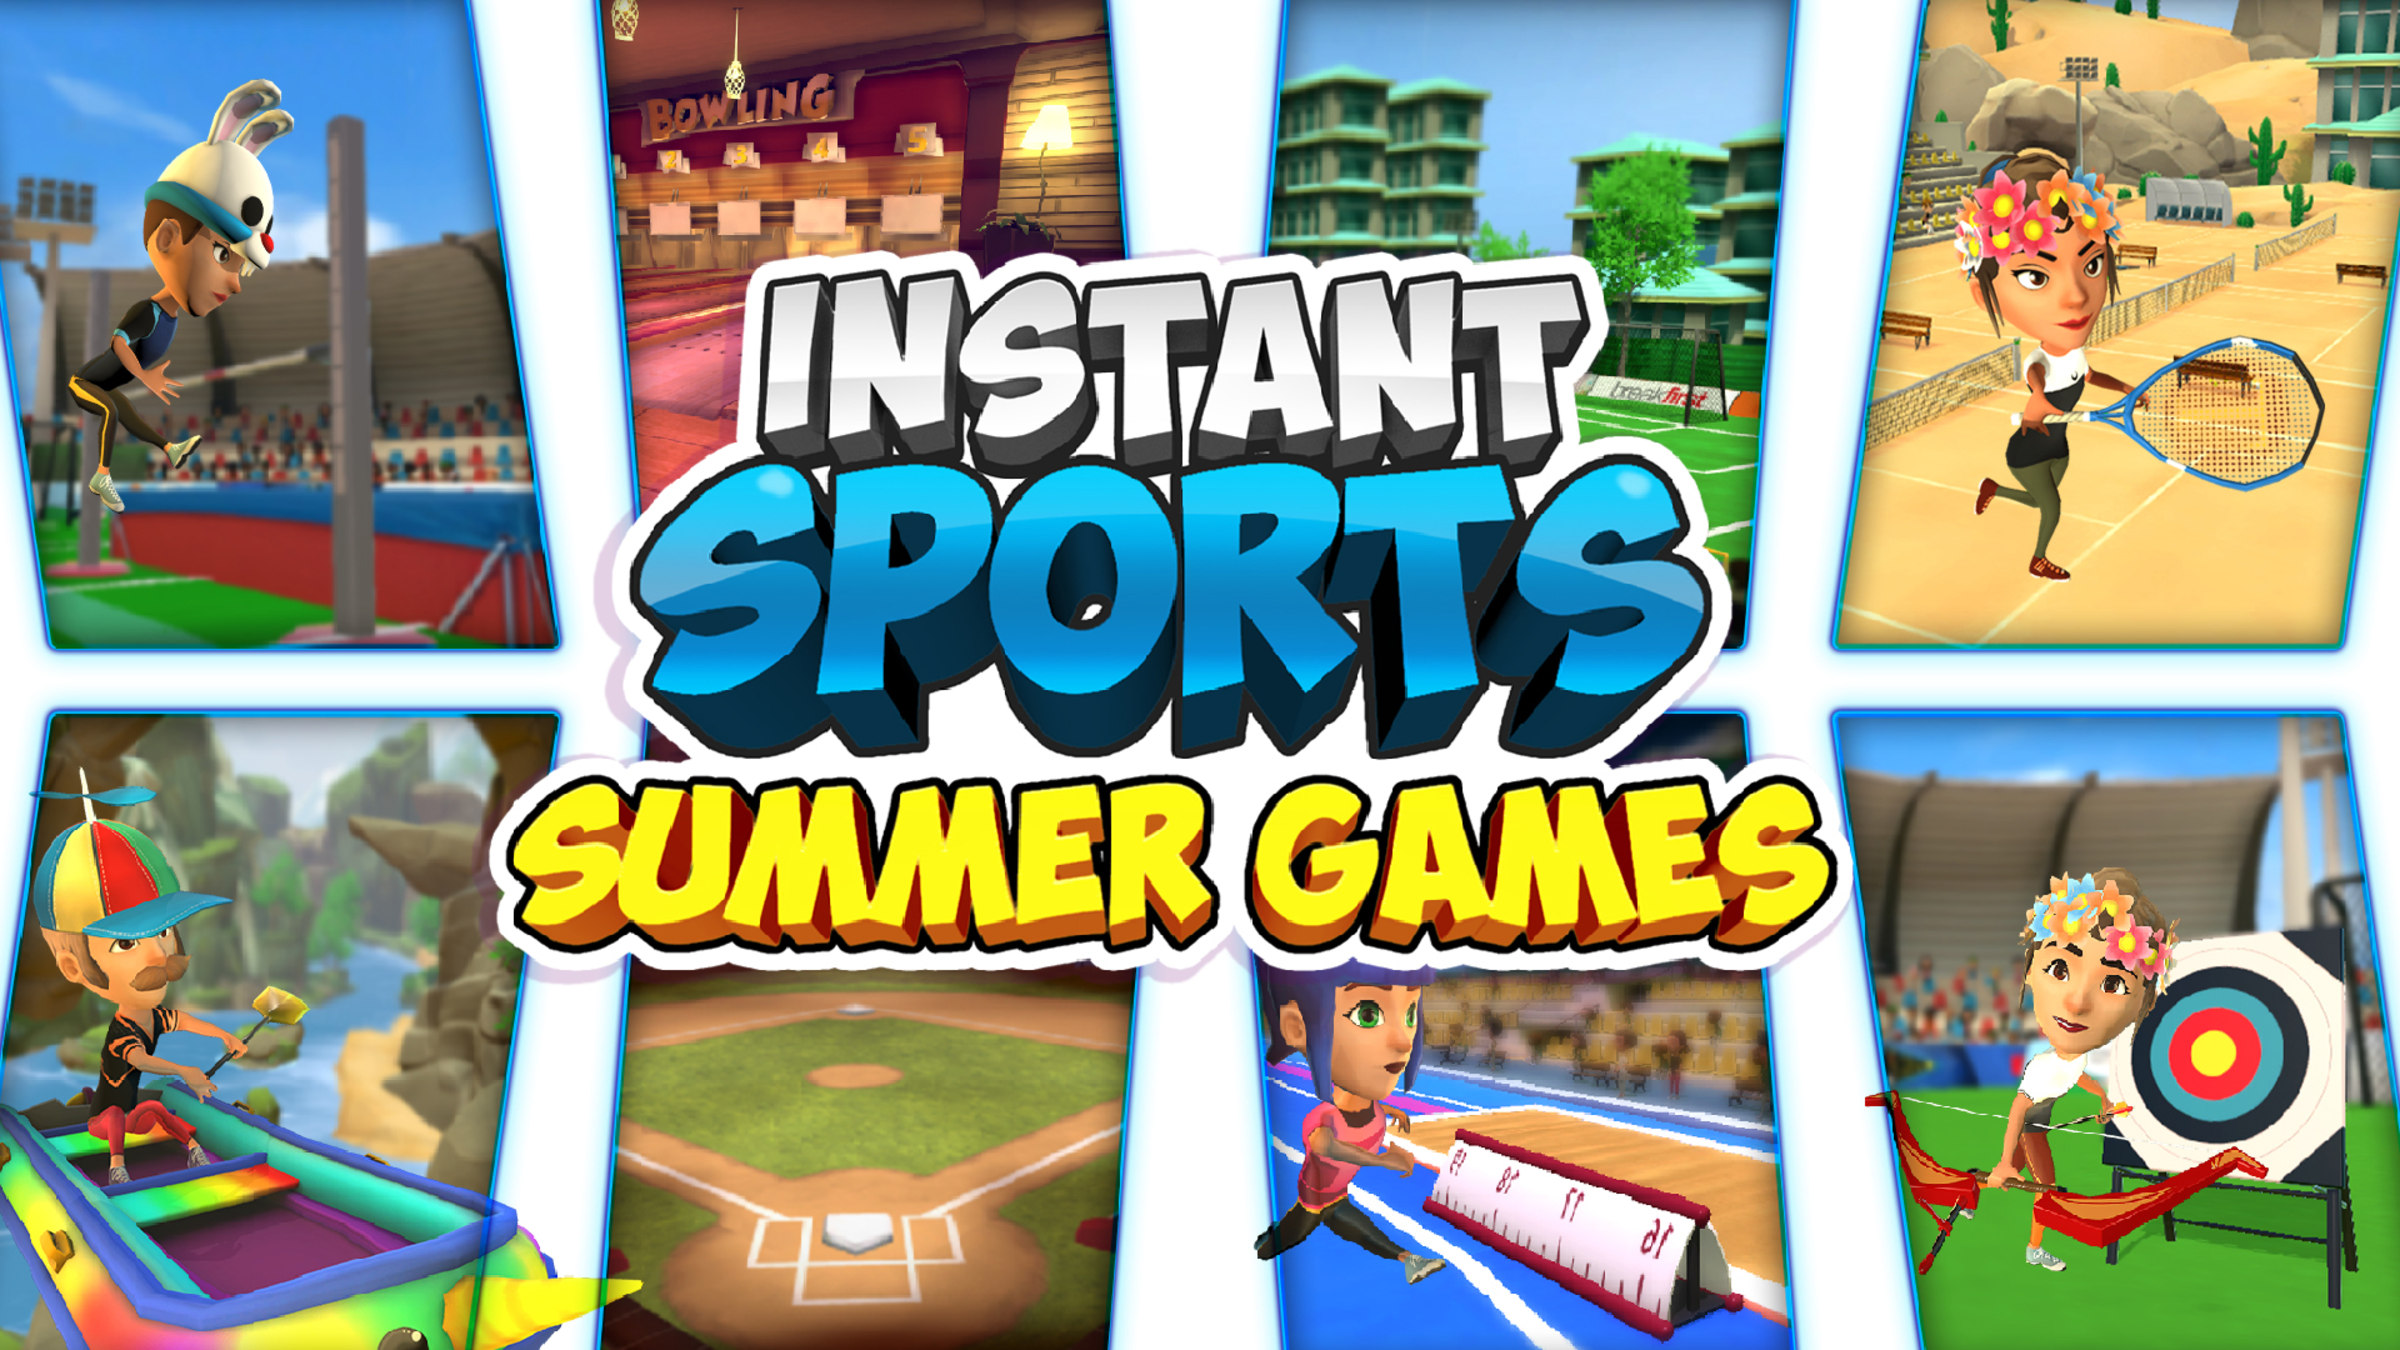 Play 100% Free Games, Instant & Online